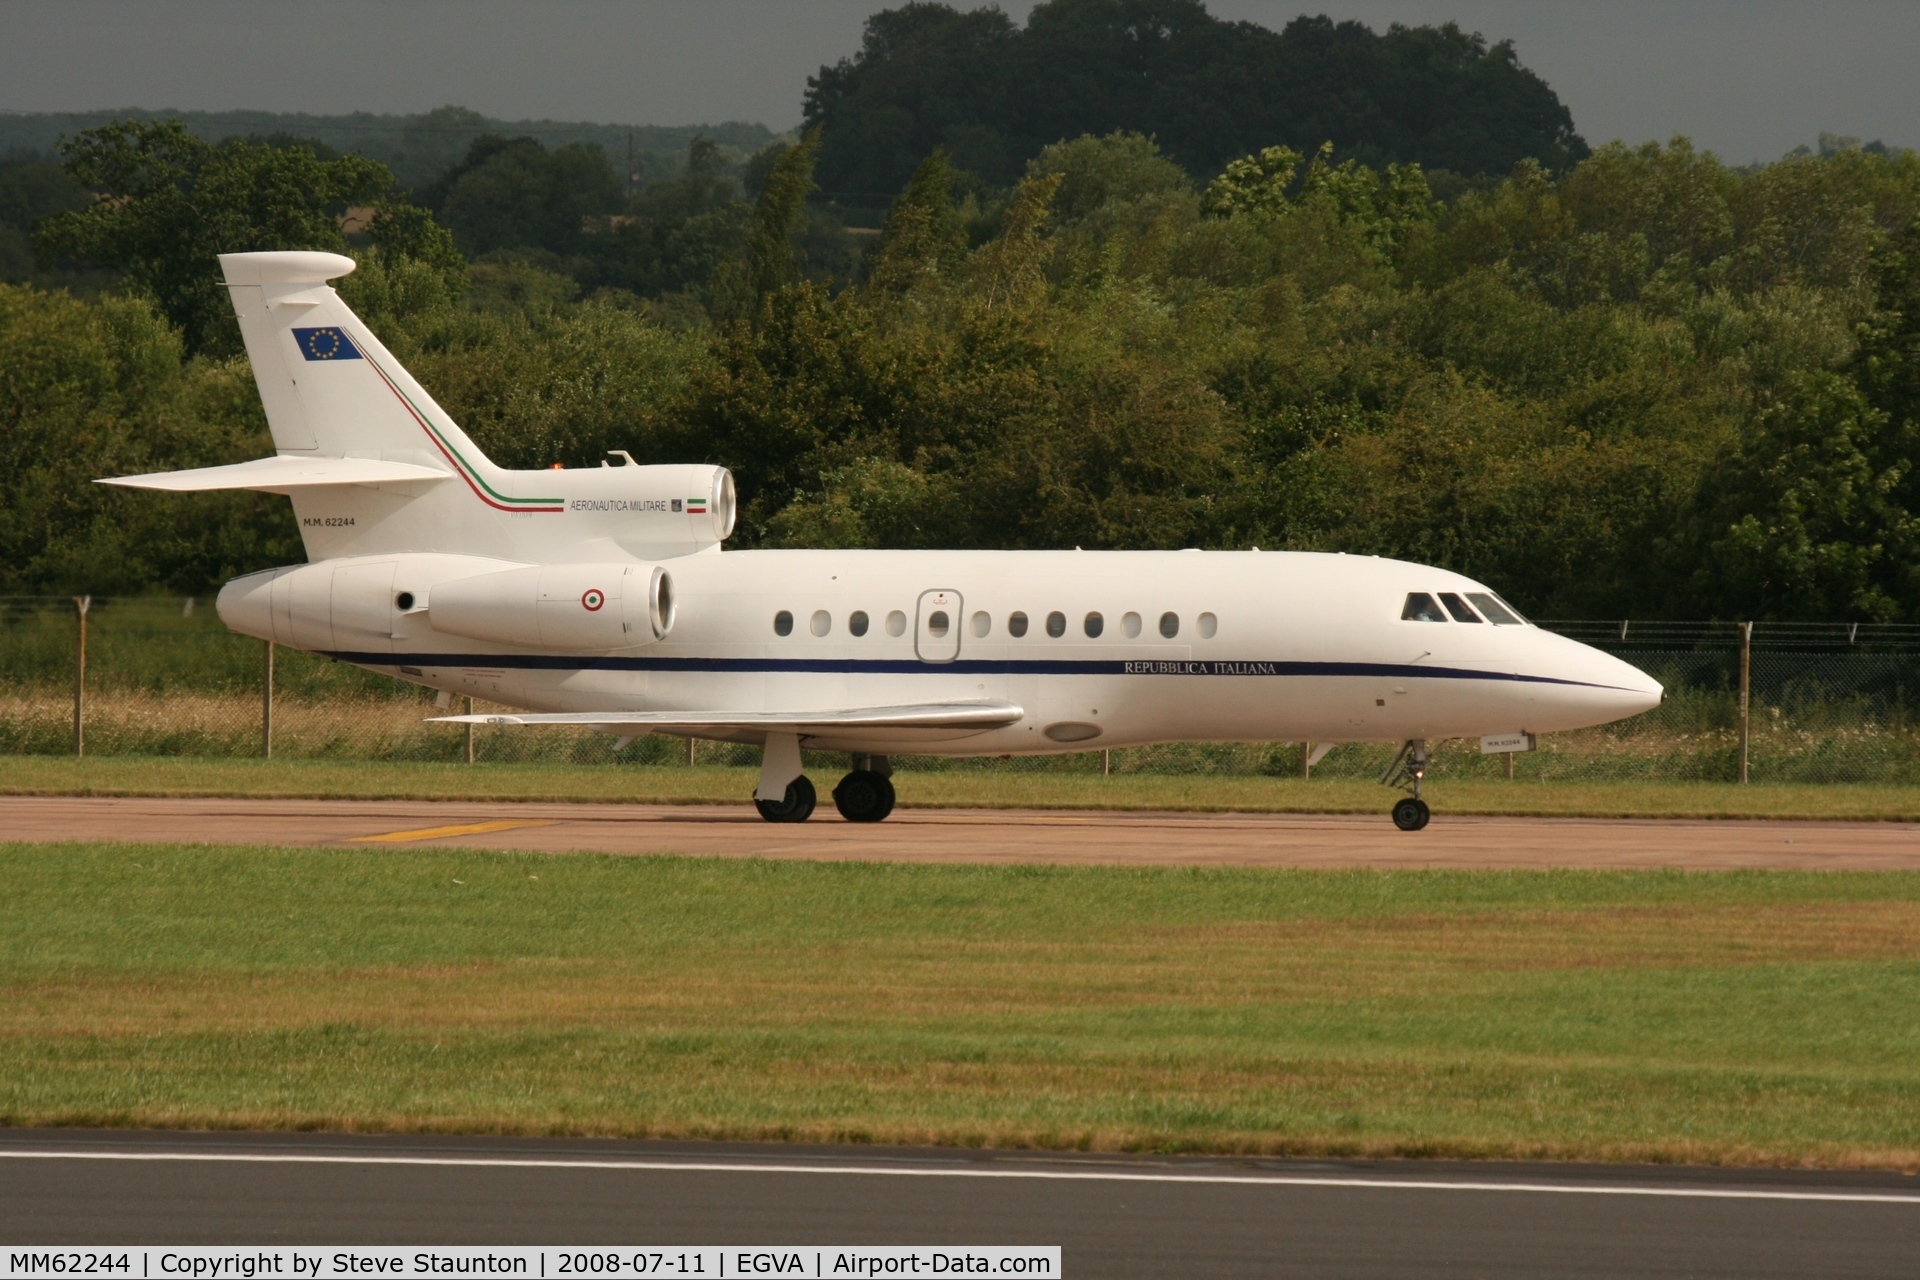 MM62244, 2005 Dassault Falcon 900EX C/N 149, Taken at the Royal International Air Tattoo 2008 during arrivals and departures (show days cancelled due to bad weather)